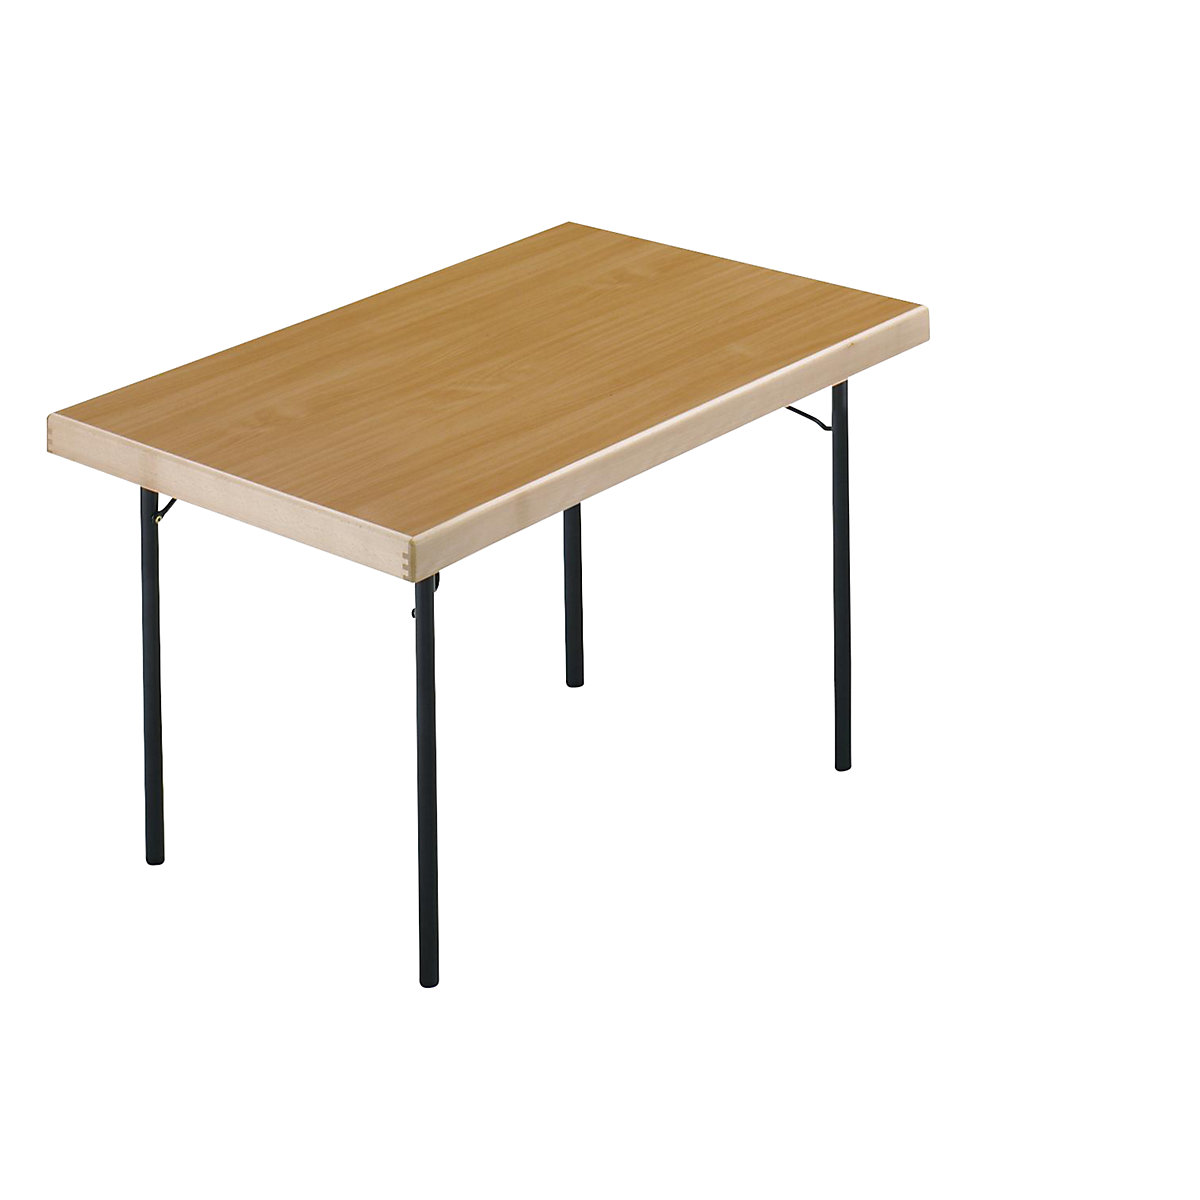 Folding table, 4-footed frame, 1200 x 800 mm, charcoal frame, beech finish tabletop-13